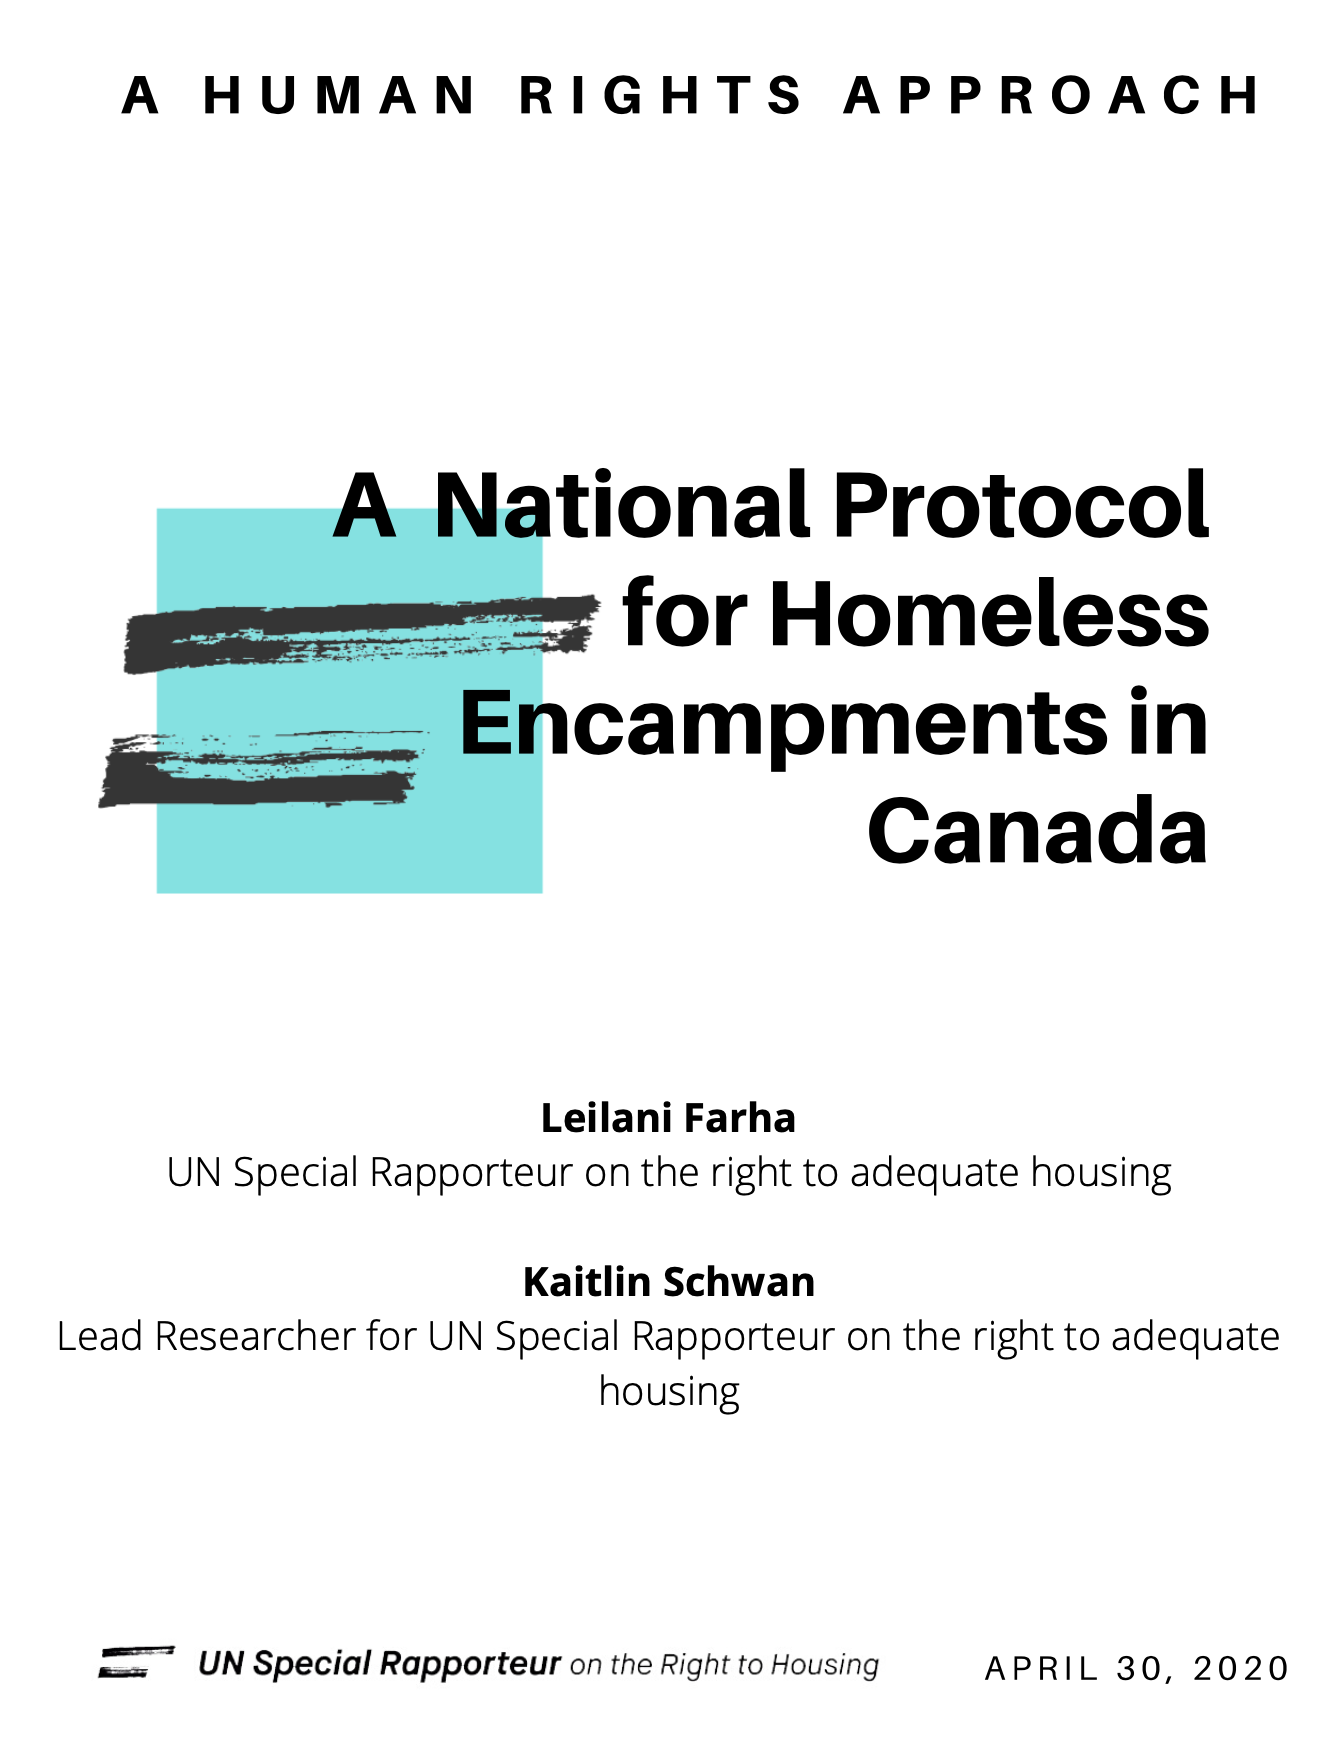 national-proposal-for-homeless-encampments-in-canada